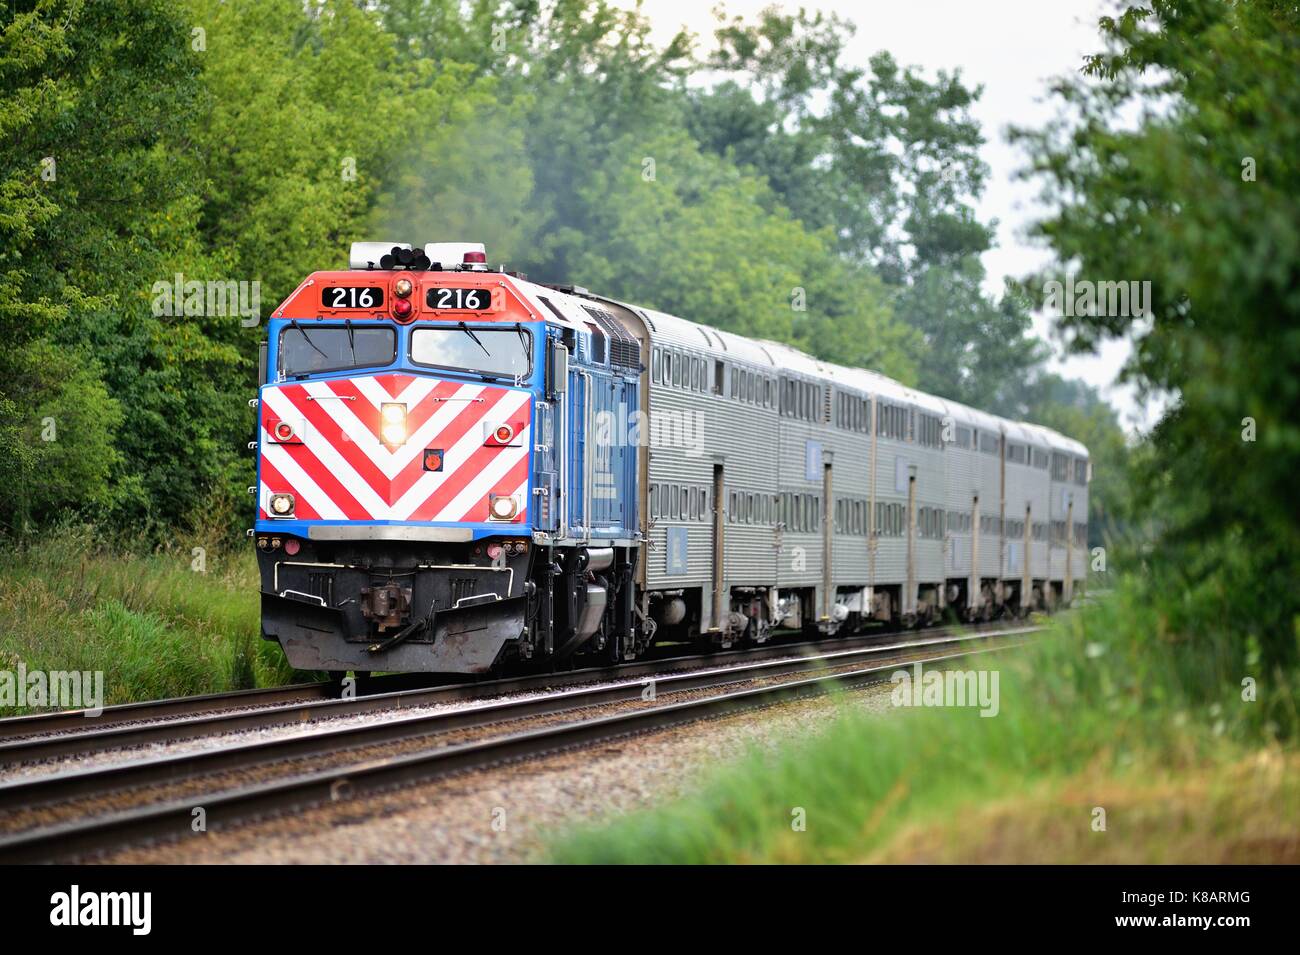 A westbound Metra train transporting commuters from Chicago through suburban Bartlett, Illinois., USA. Stock Photo